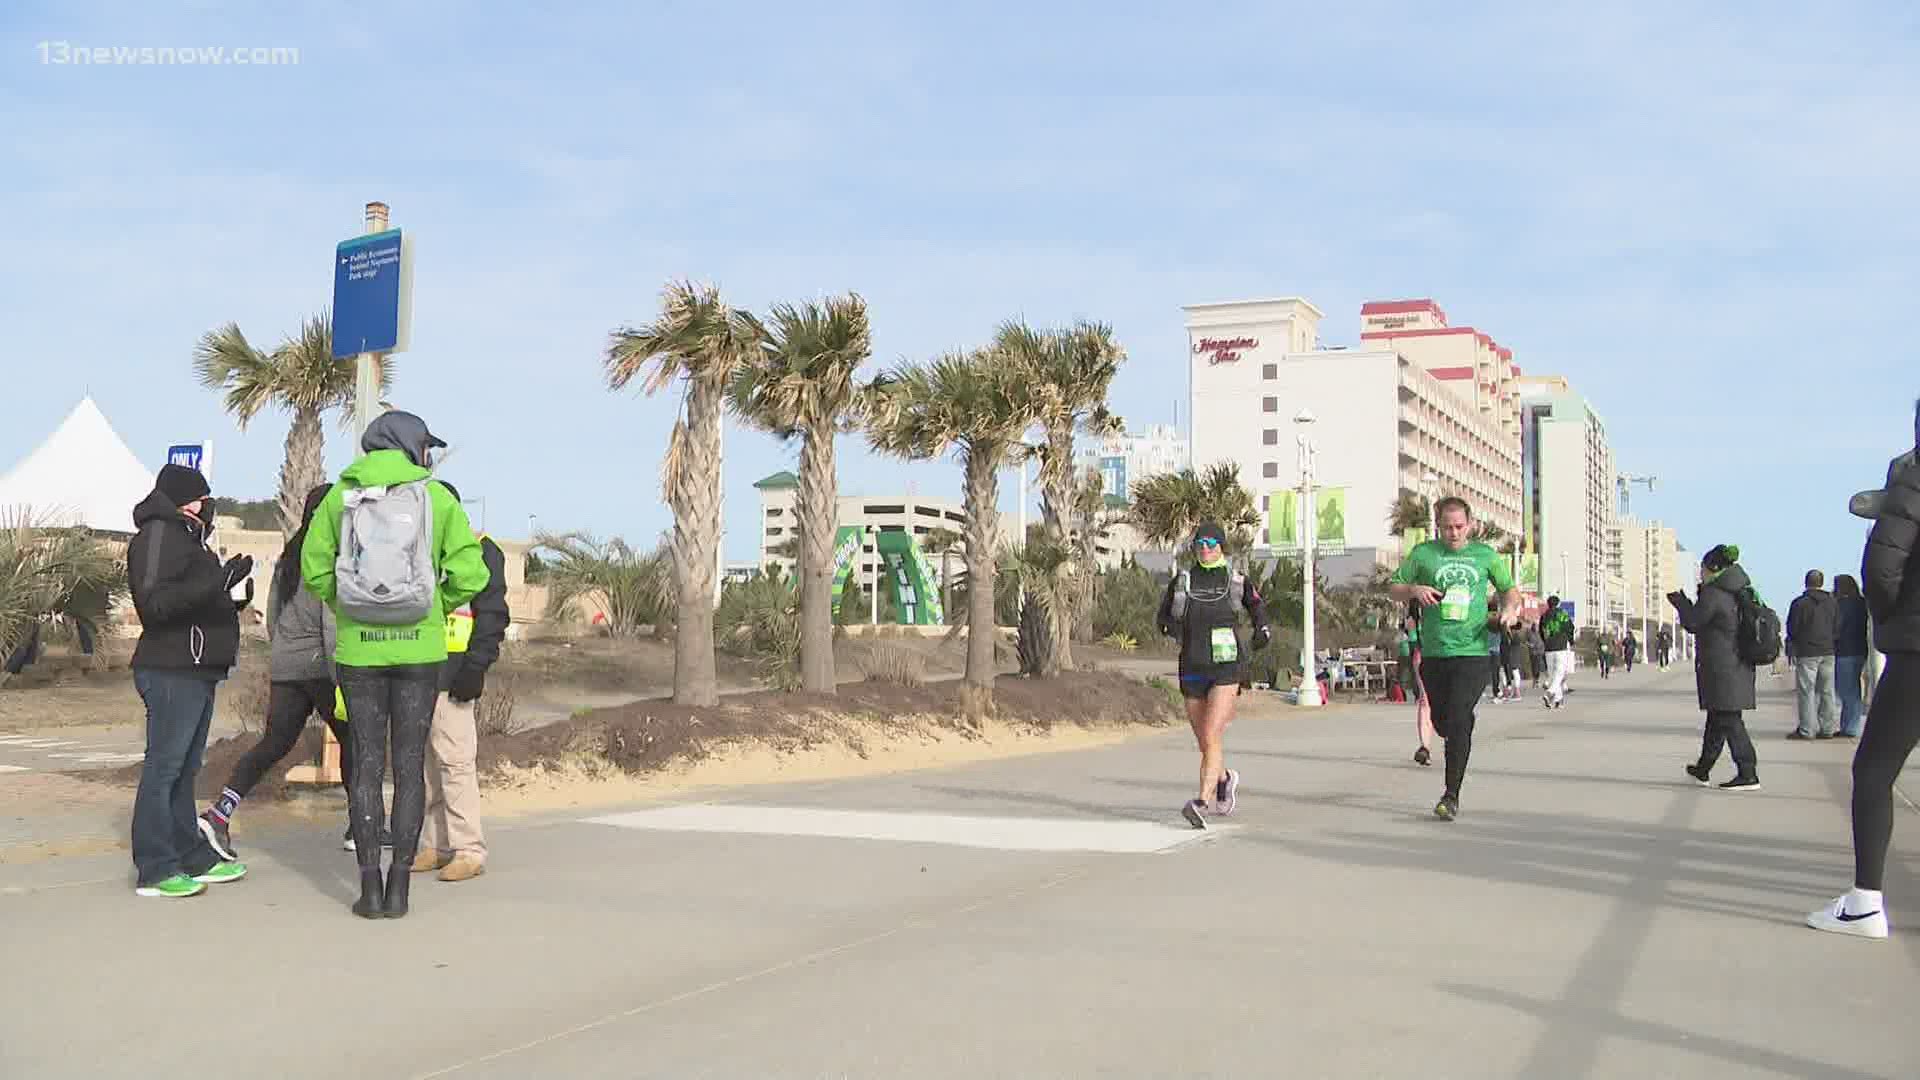 Though it's on a much smaller scale compared to years past, Shamrock Marathon Weekend made a come-back.